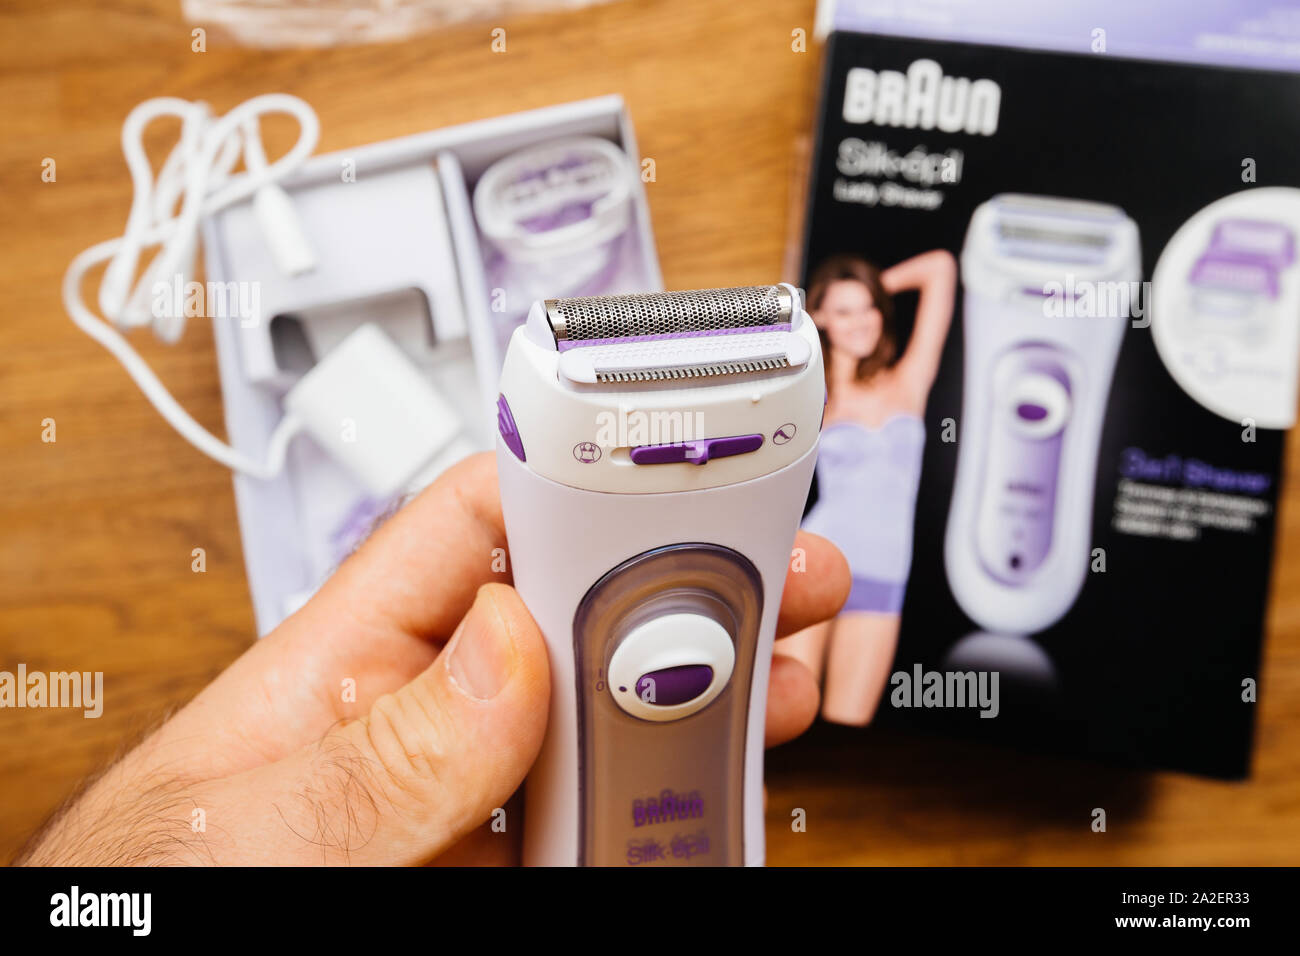 Paris, France - Sep 23, 2019: POV man hand unboxing new Braun Silk Epil  women lady shaver epilator 3 in 1 trimmer, exfoliation system for smooth  and radiant skin - wooden table background Stock Photo - Alamy